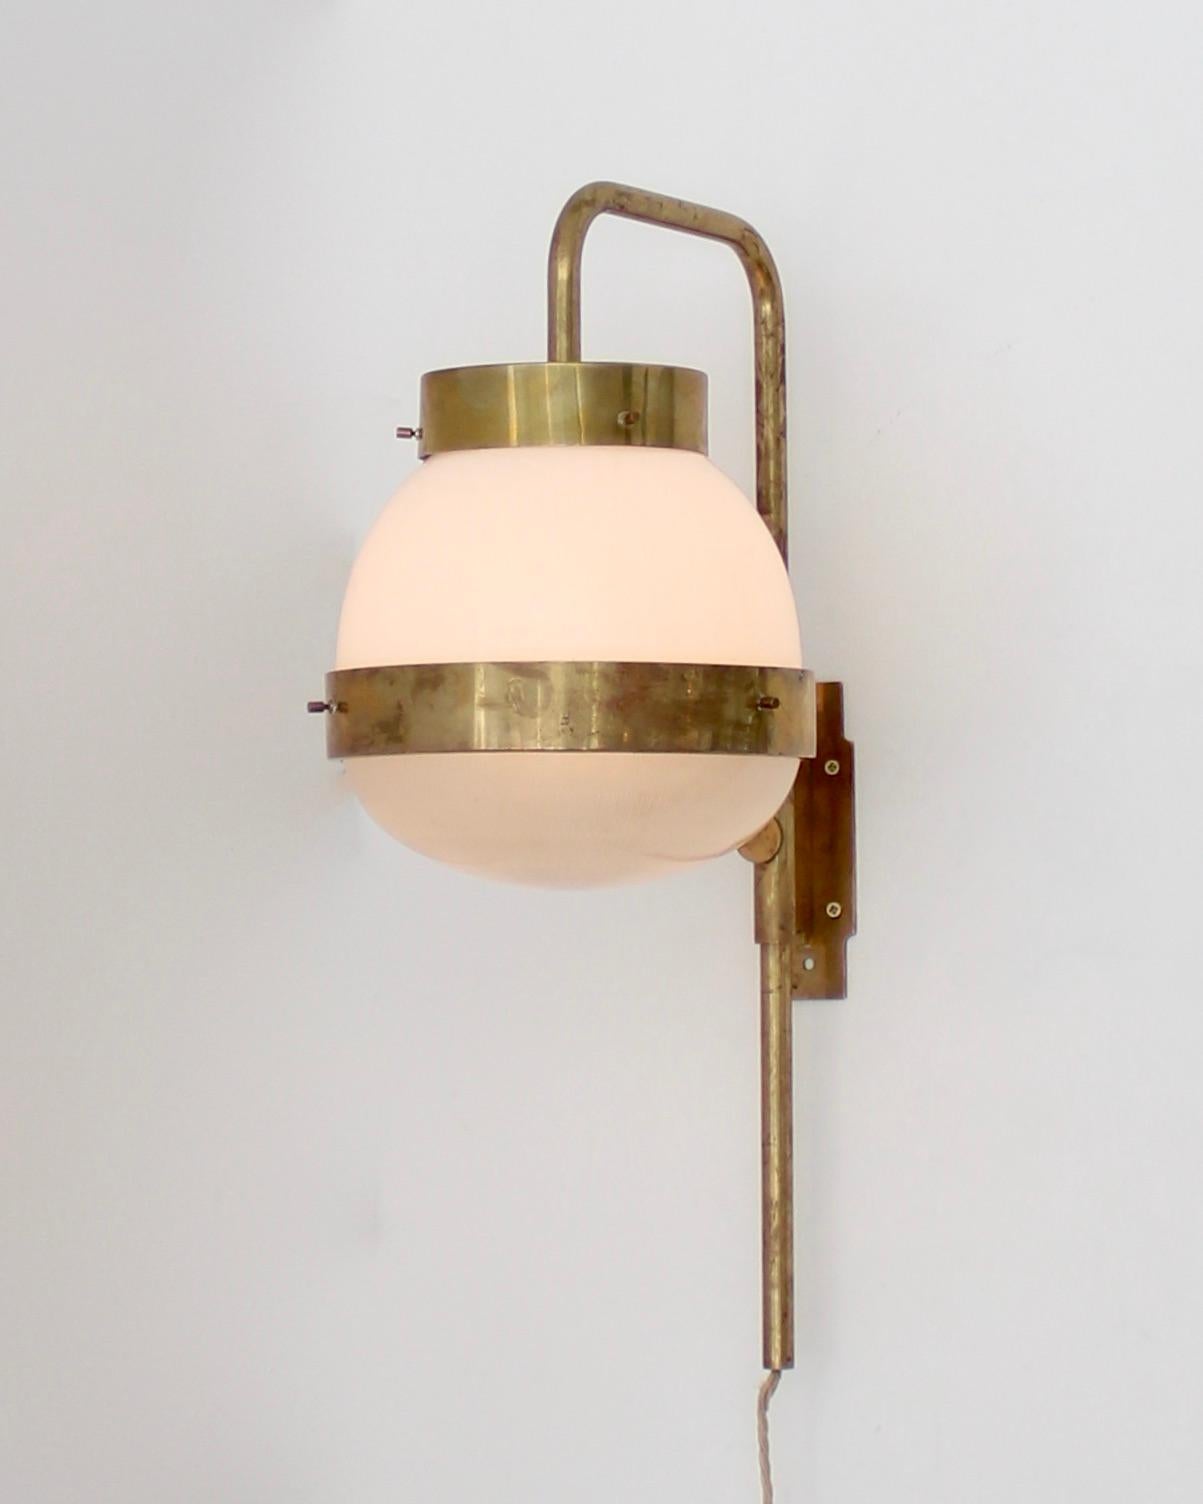 A single Sergio Mazza Italian vintage Delta sconce for Artemide.
Brass with Holophane and milk glass encircled by brass bands.
Excellent condition. 
Rewired for USA. 

 Measures: 26 in. H x 10 in. W x 14 in. D.